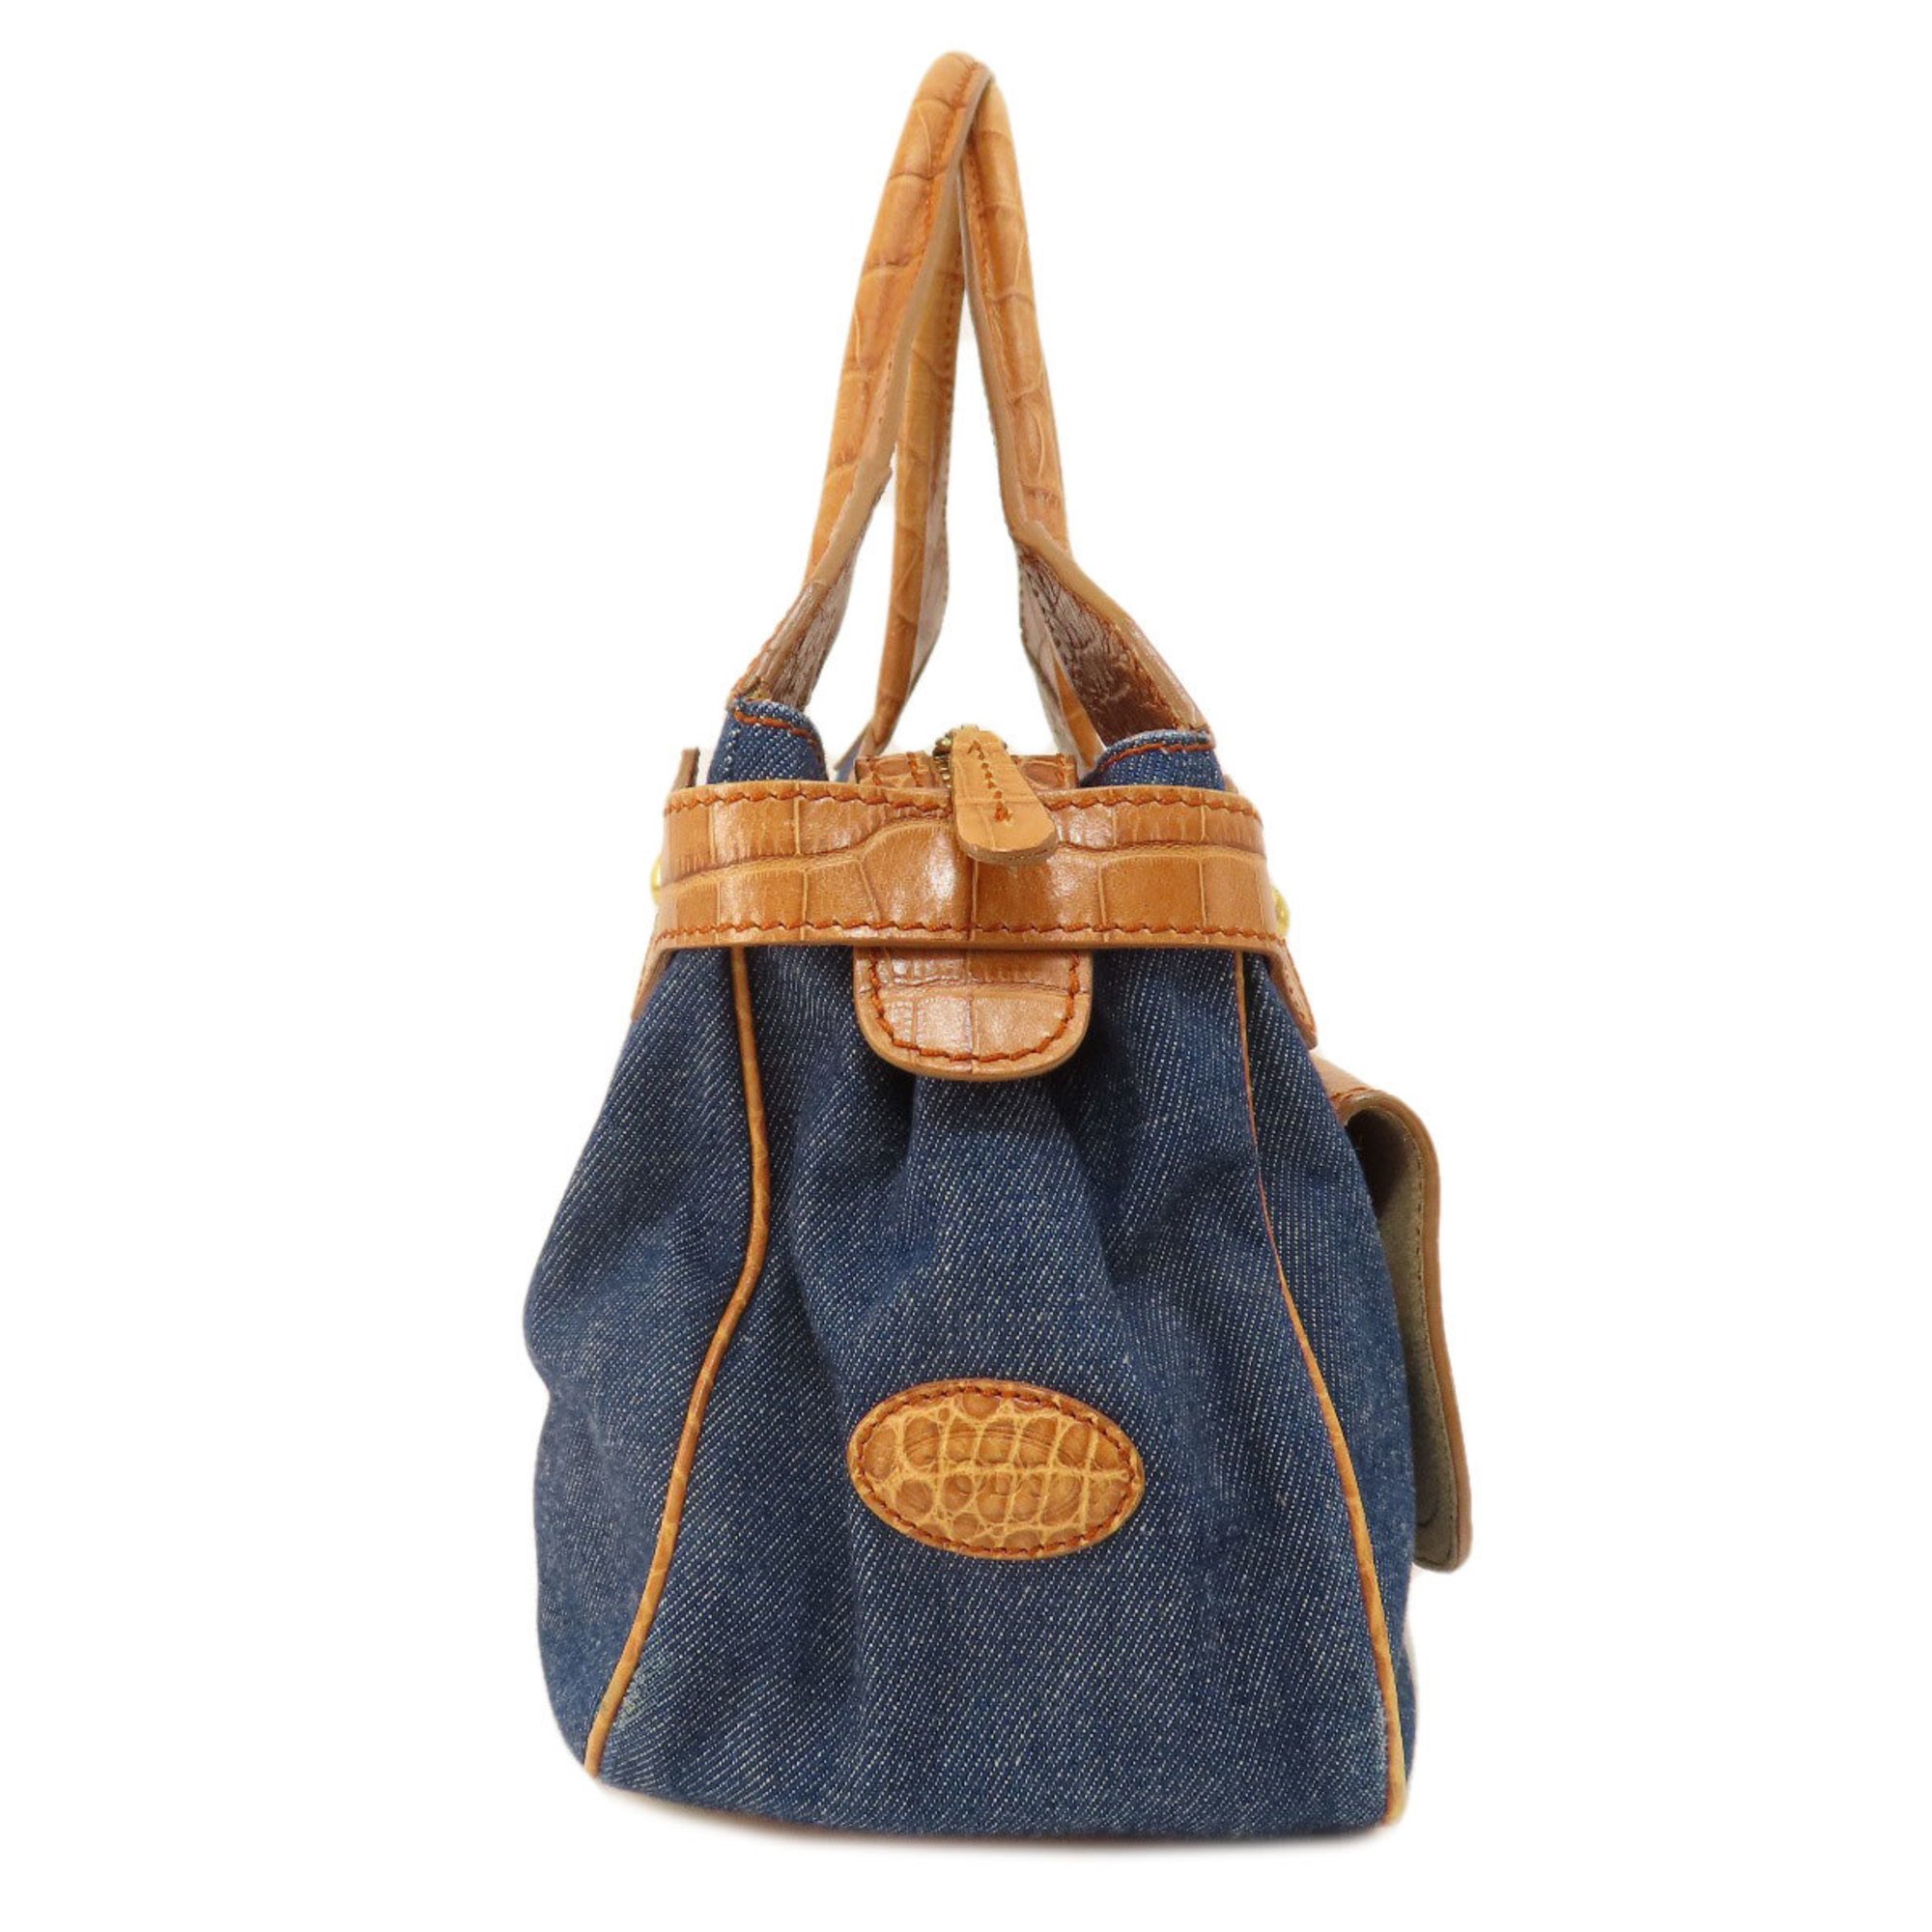 Tod's embossed tote bag in leather and denim for women